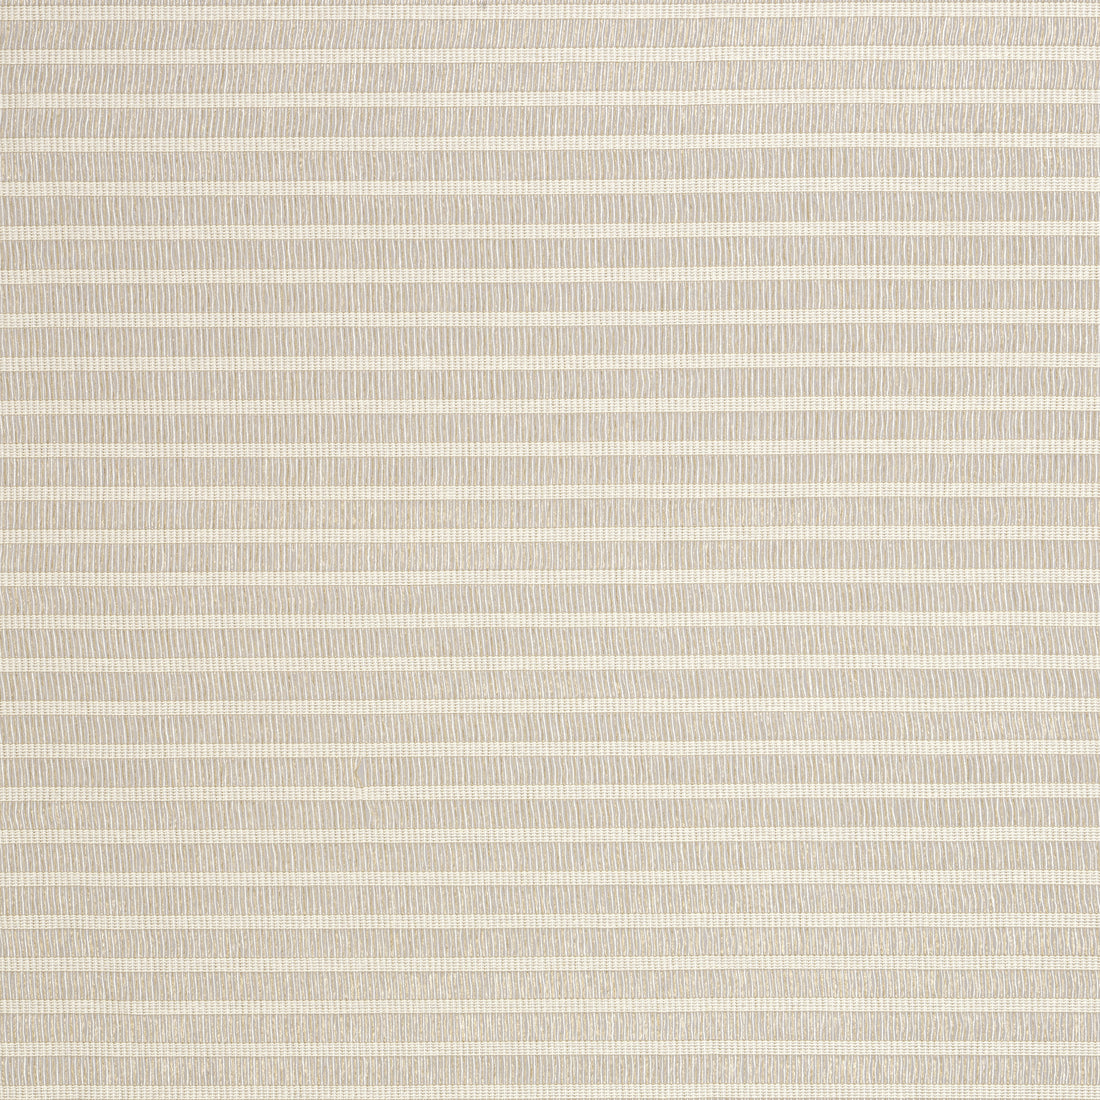 Lanai fabric in linen color - pattern number FWW8270 - by Thibaut in the Aura collection